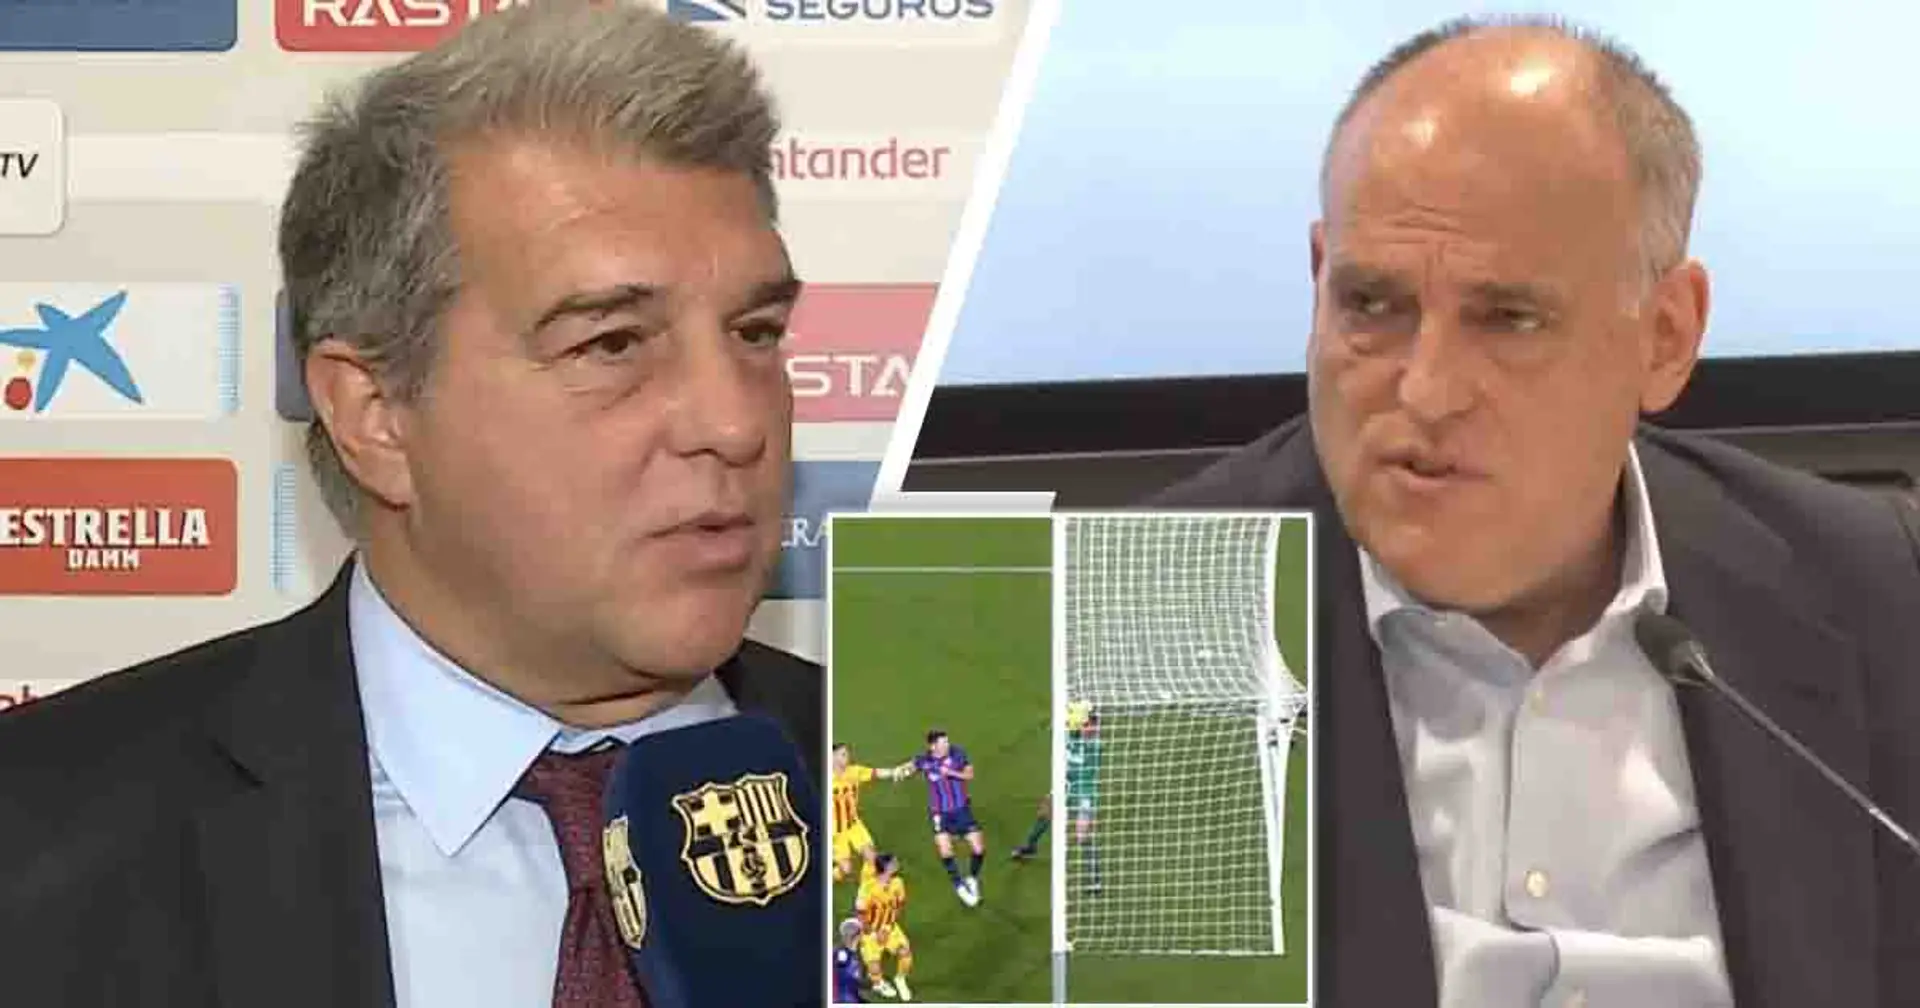 La Liga reject goal line technology for next season because of Tebas: explained